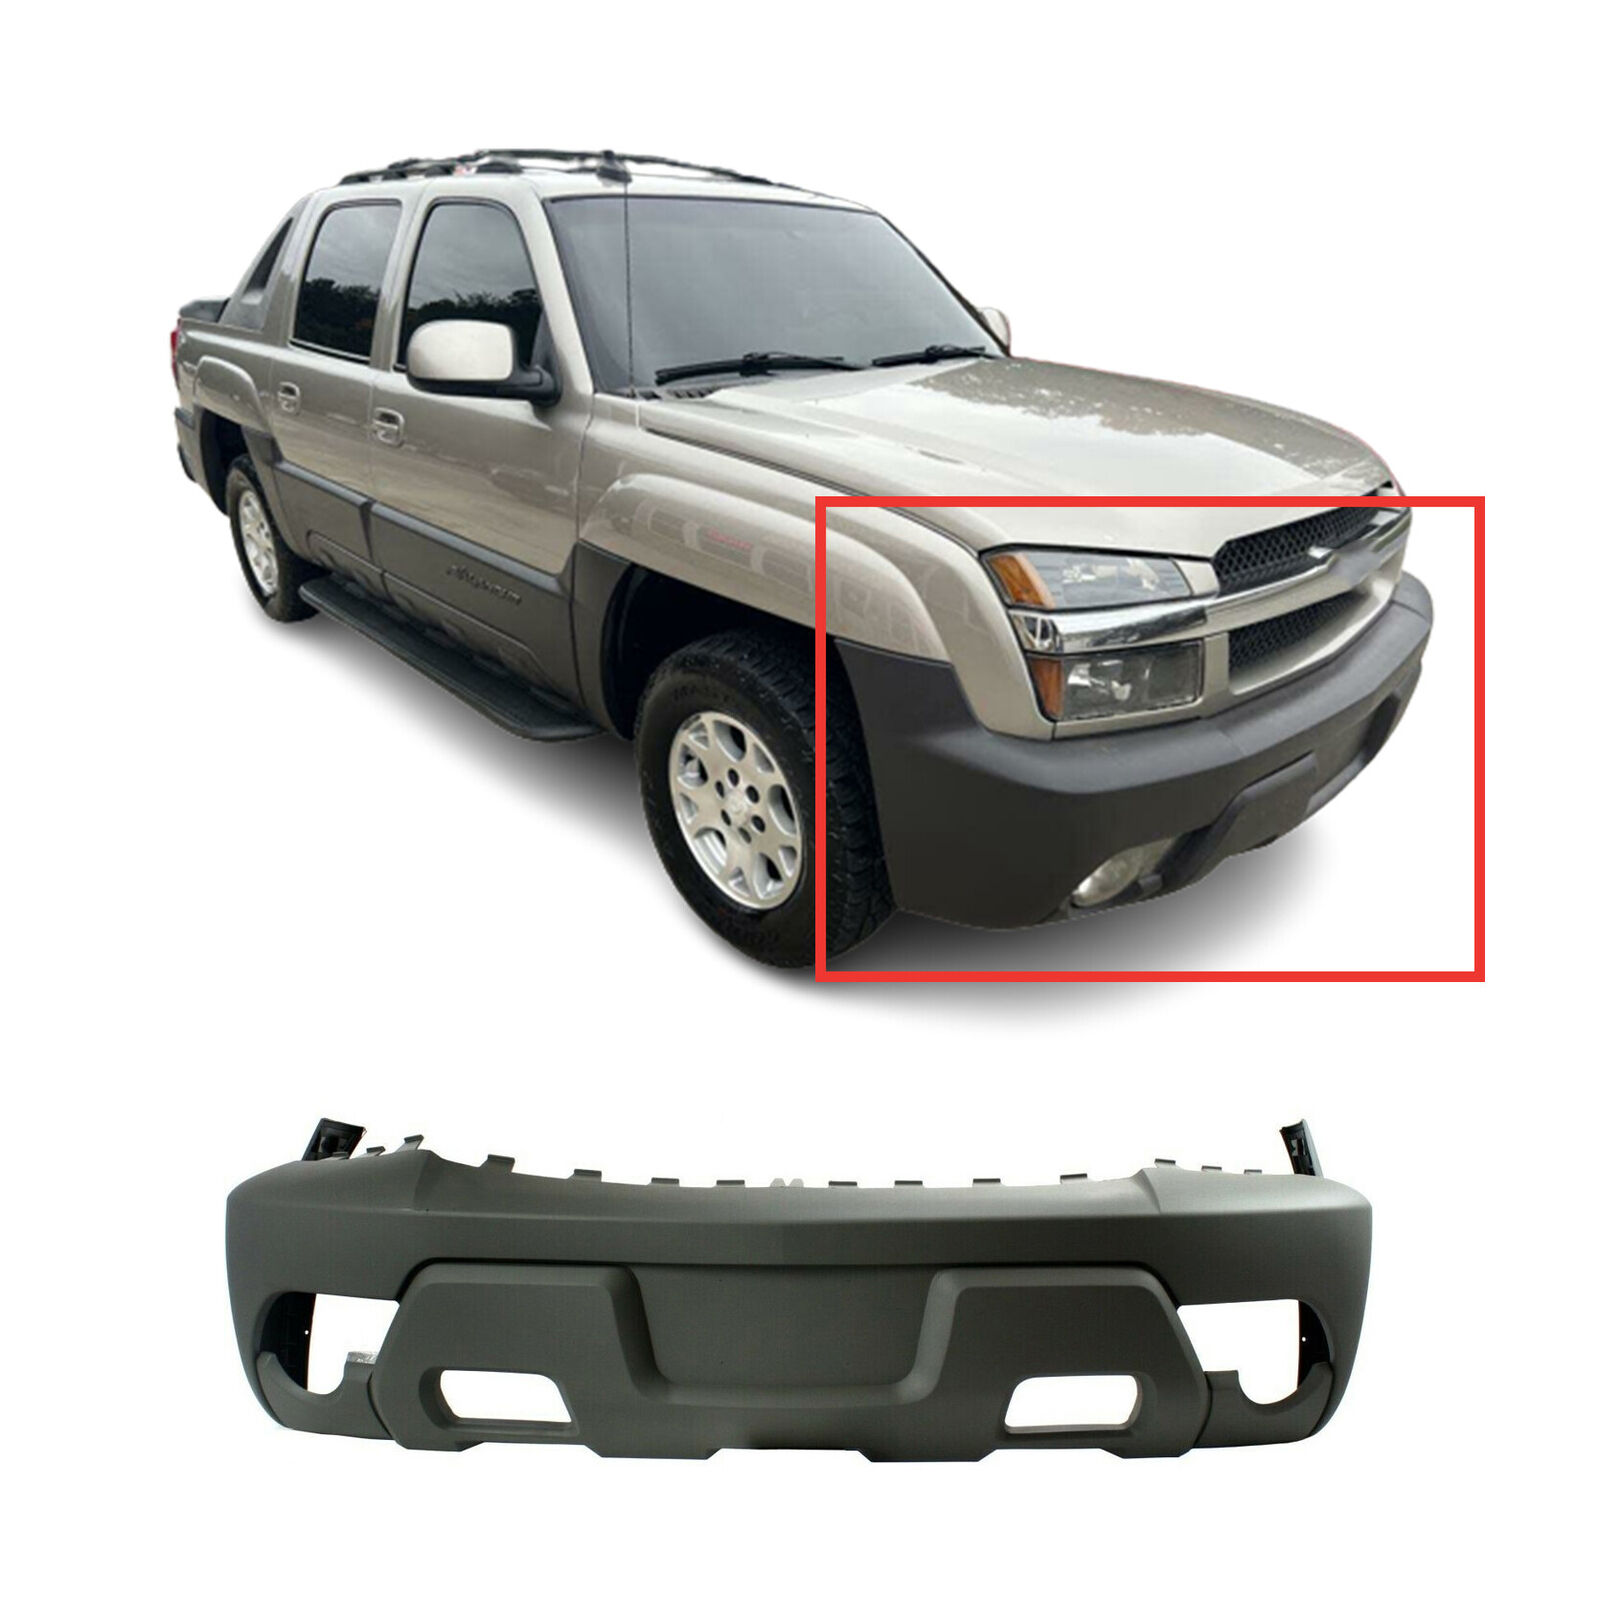 Front Bumper Cover For 2002 Chevy Chevrolet Avalanche 1500 w/ fog holes Textured